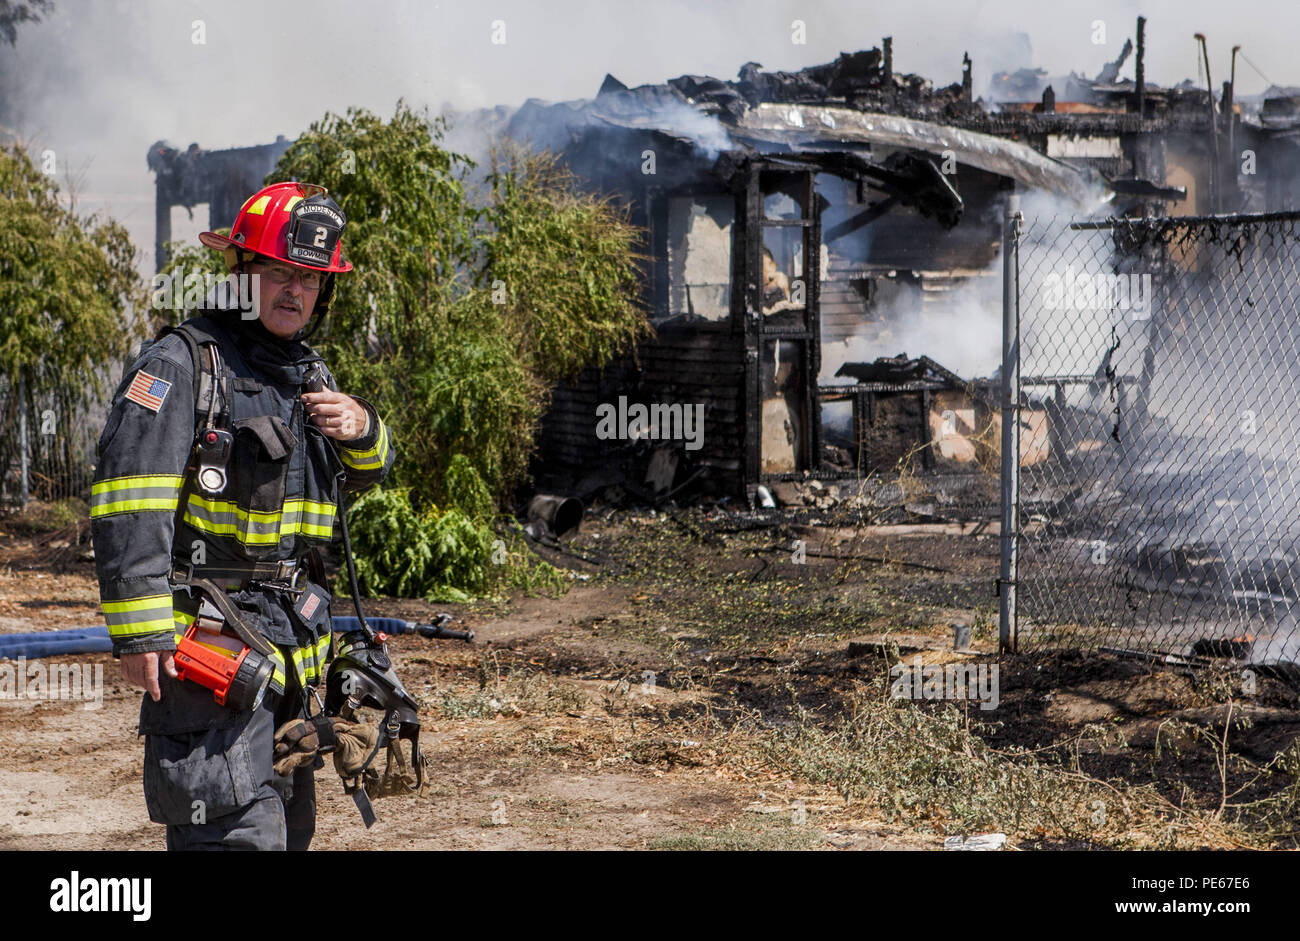 Modesto, California, U.S.A. 12th Aug, 2018. A home and field at the corner of Seattle Street and Amador Avenue in West Modesto, CA were destroyed by a fast moving fire Sunday Aug. 12, 2018. Modesto Fire Department along with Ceres and Stanislaus Consolidated responded to the two alarm fire. No injuries were reported. Credit: Marty Bicek/ZUMA Wire/Alamy Live News Stock Photo